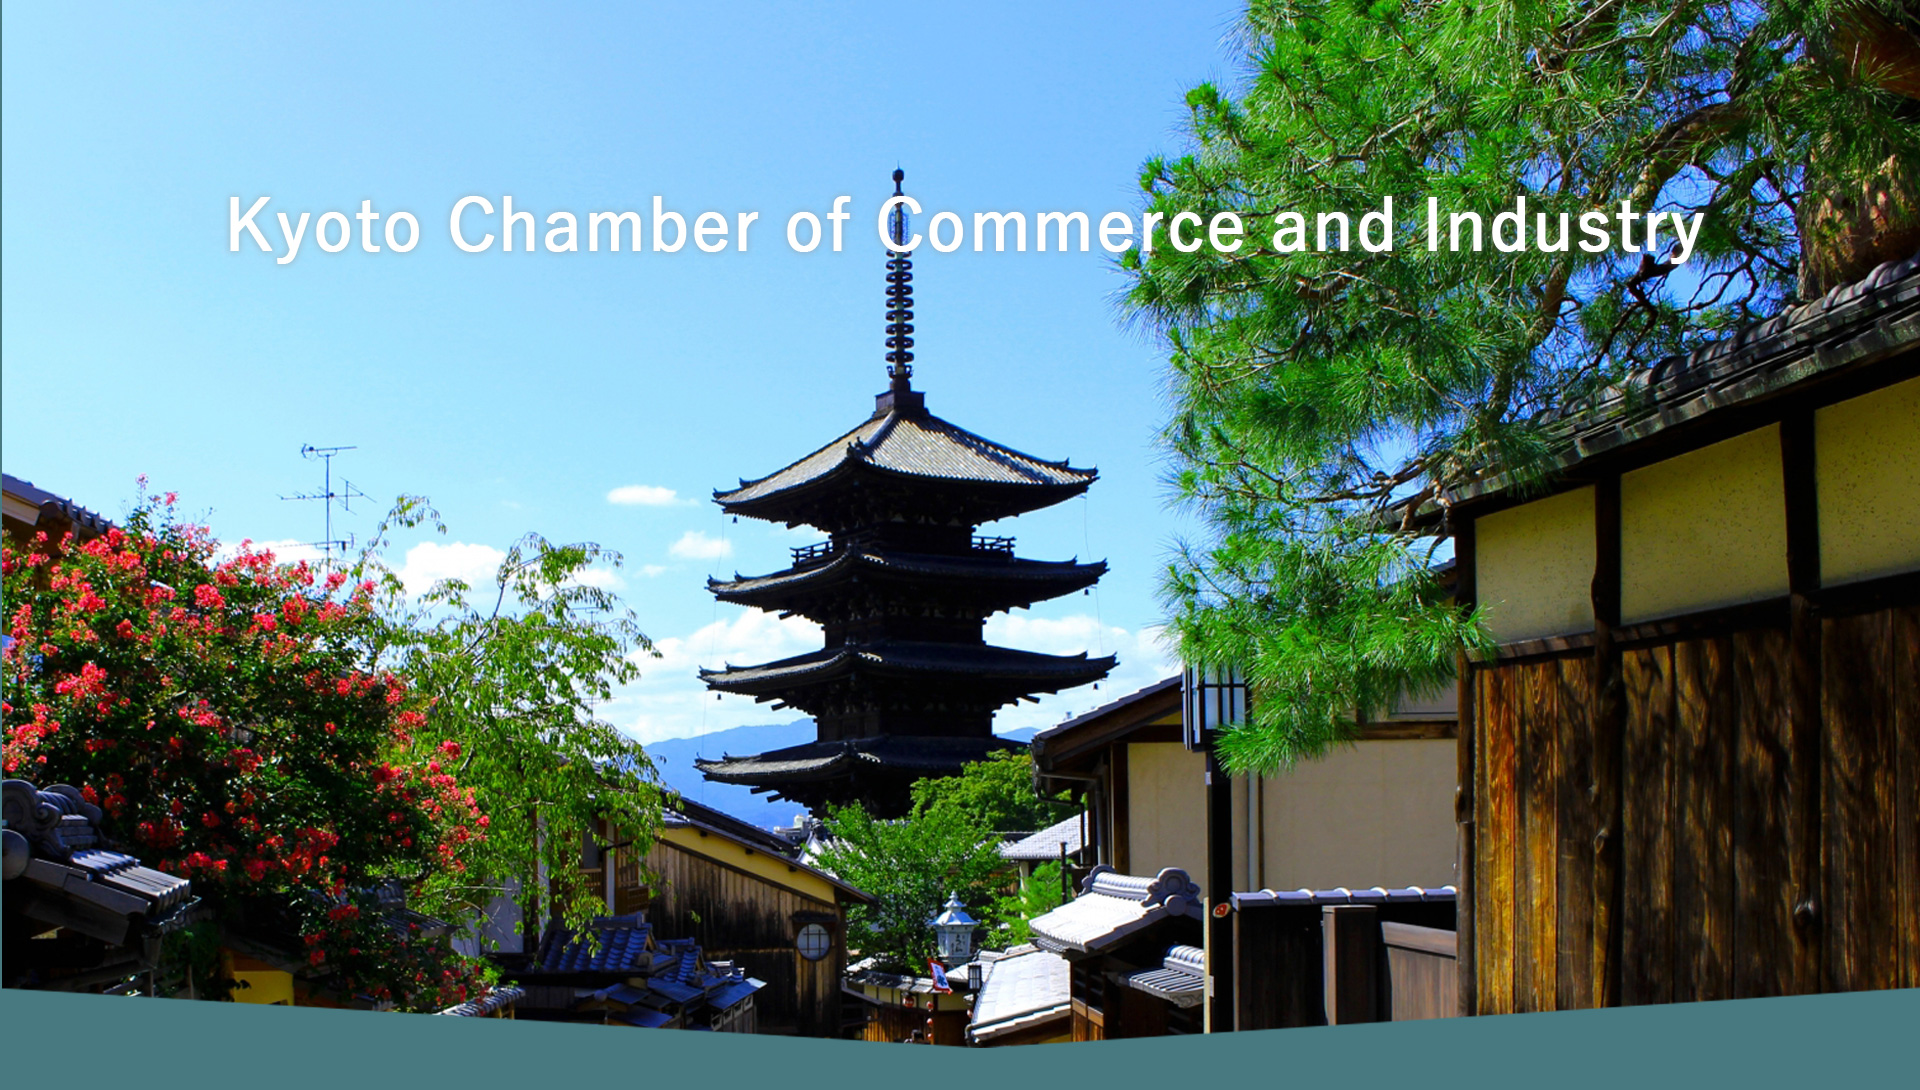 Kyoto Chamber of Commerce and Industry